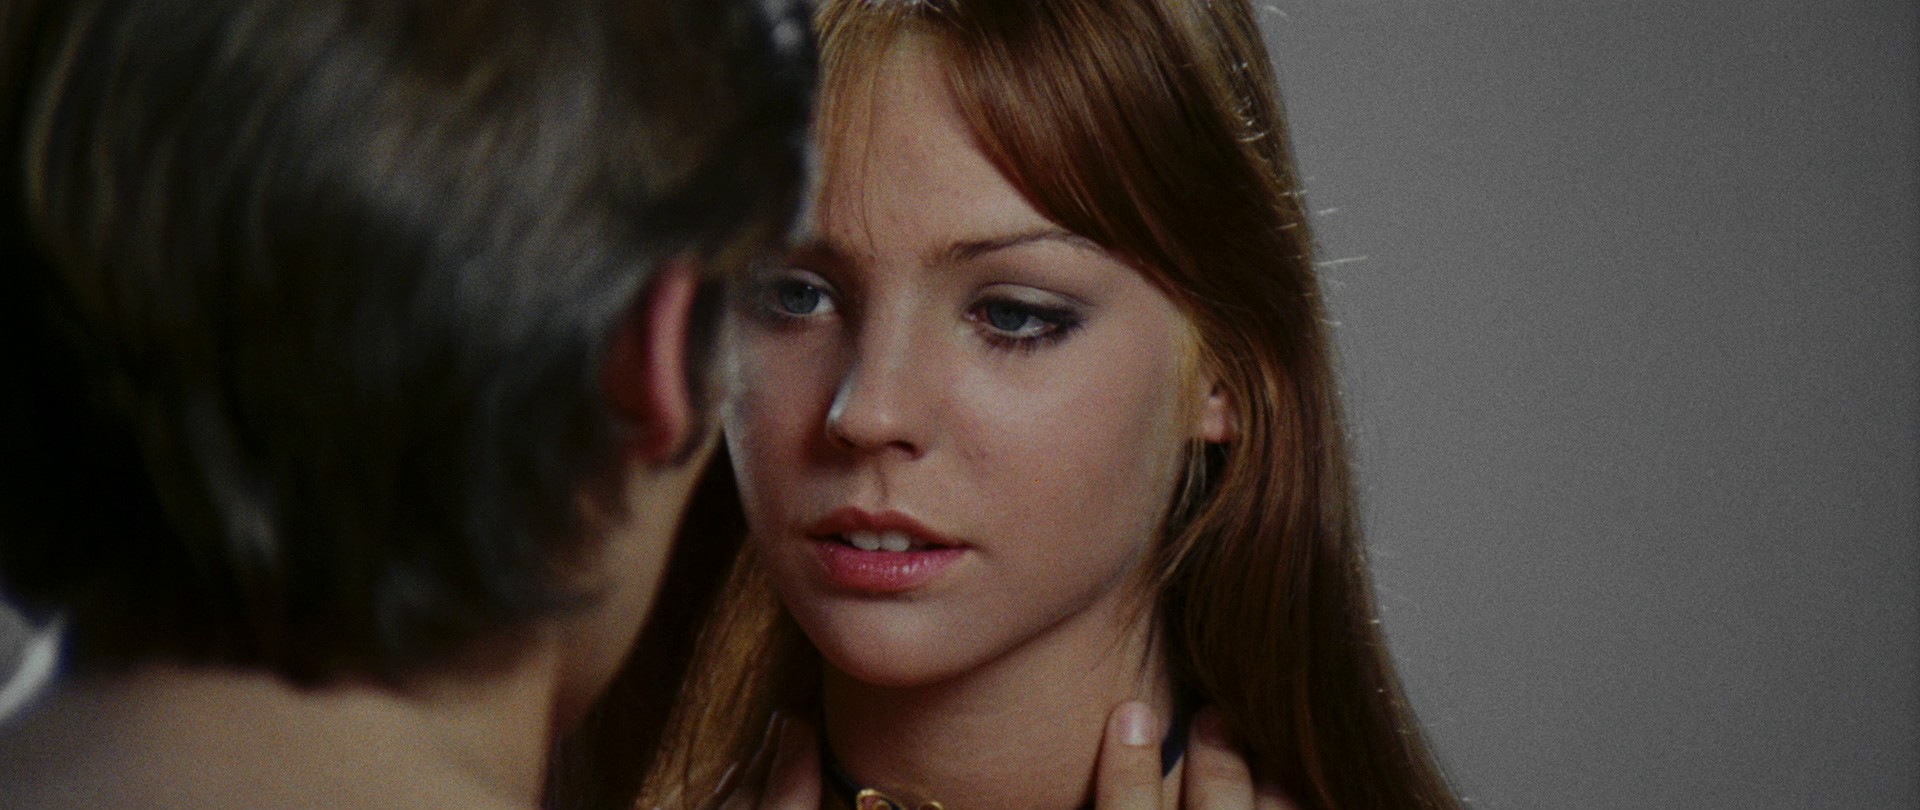 The Bloodstained Butterfly (1971) Screenshot 4 